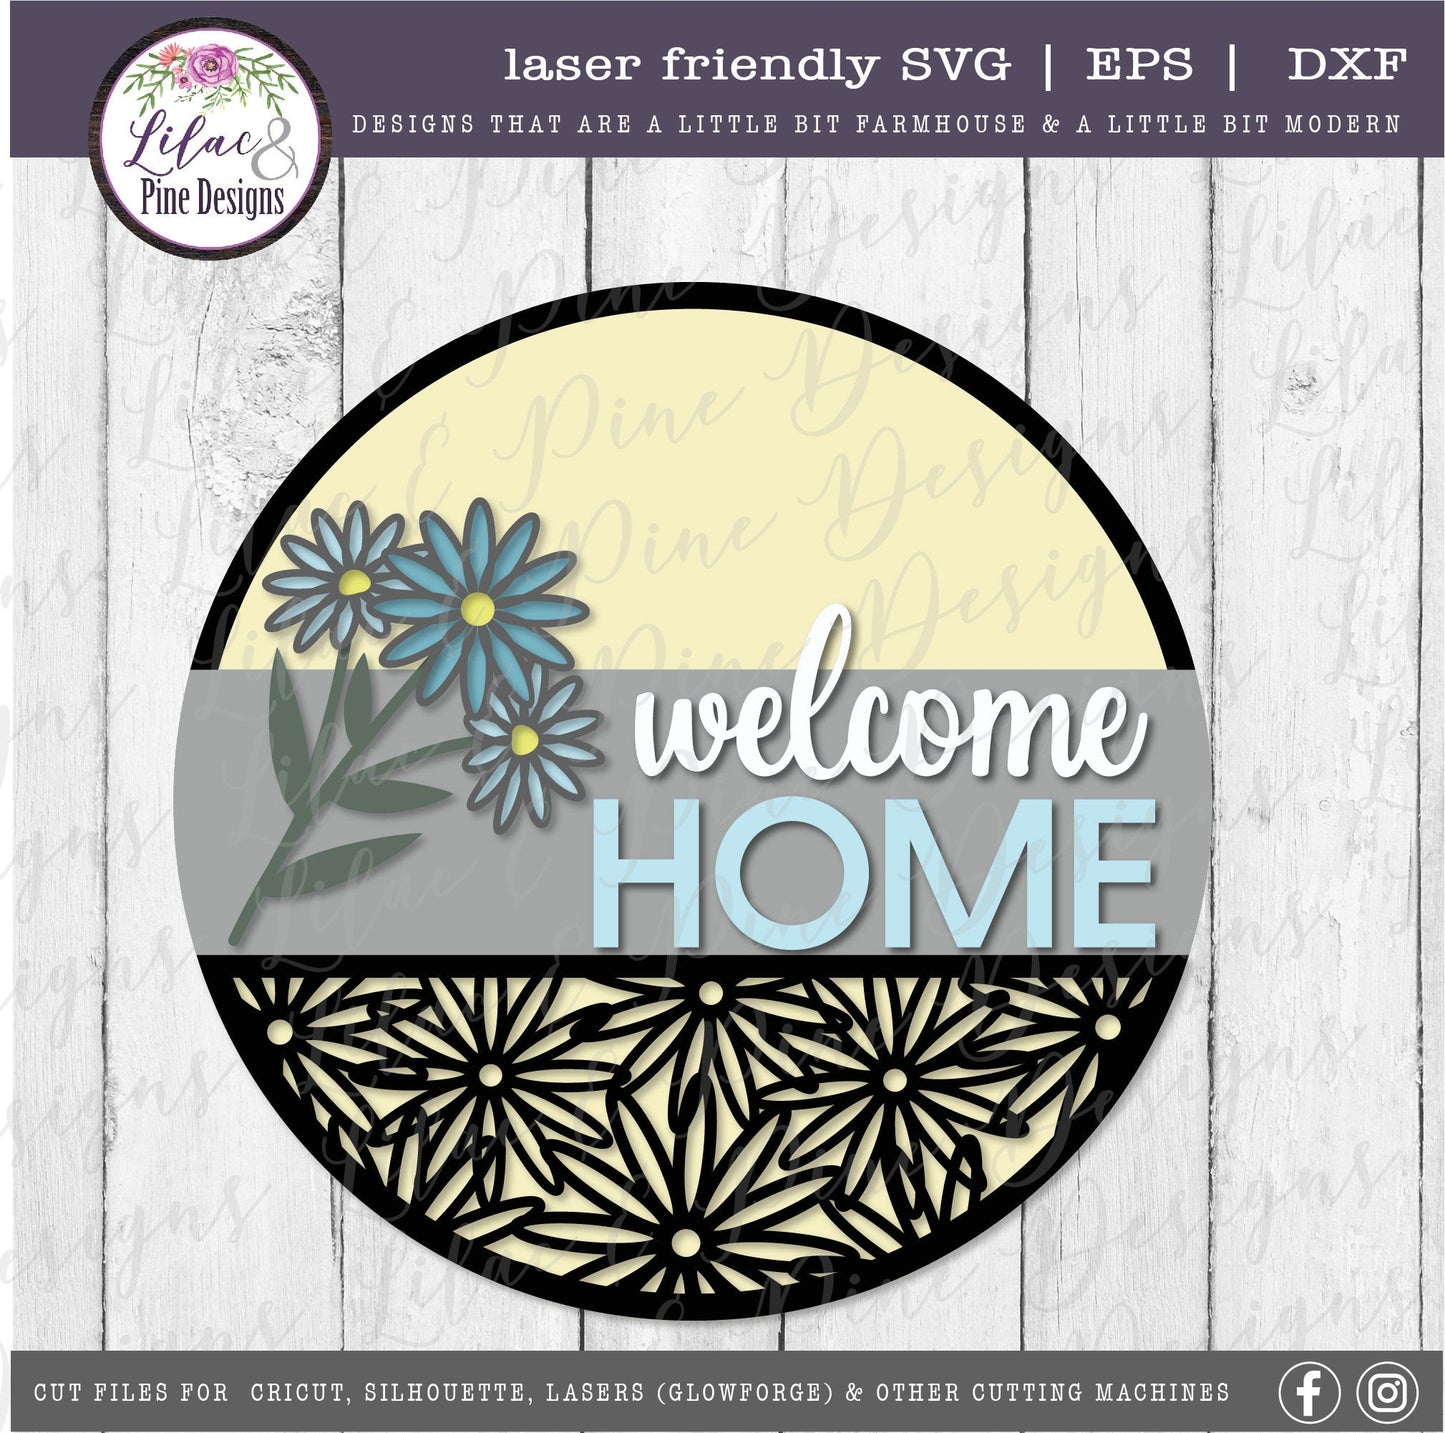 Daisy welcome home sign, summer svg, welcome home SVG, round sign, farmhouse decor, daisy SVG, floral Svg, Glowforge Svg, laser cut file